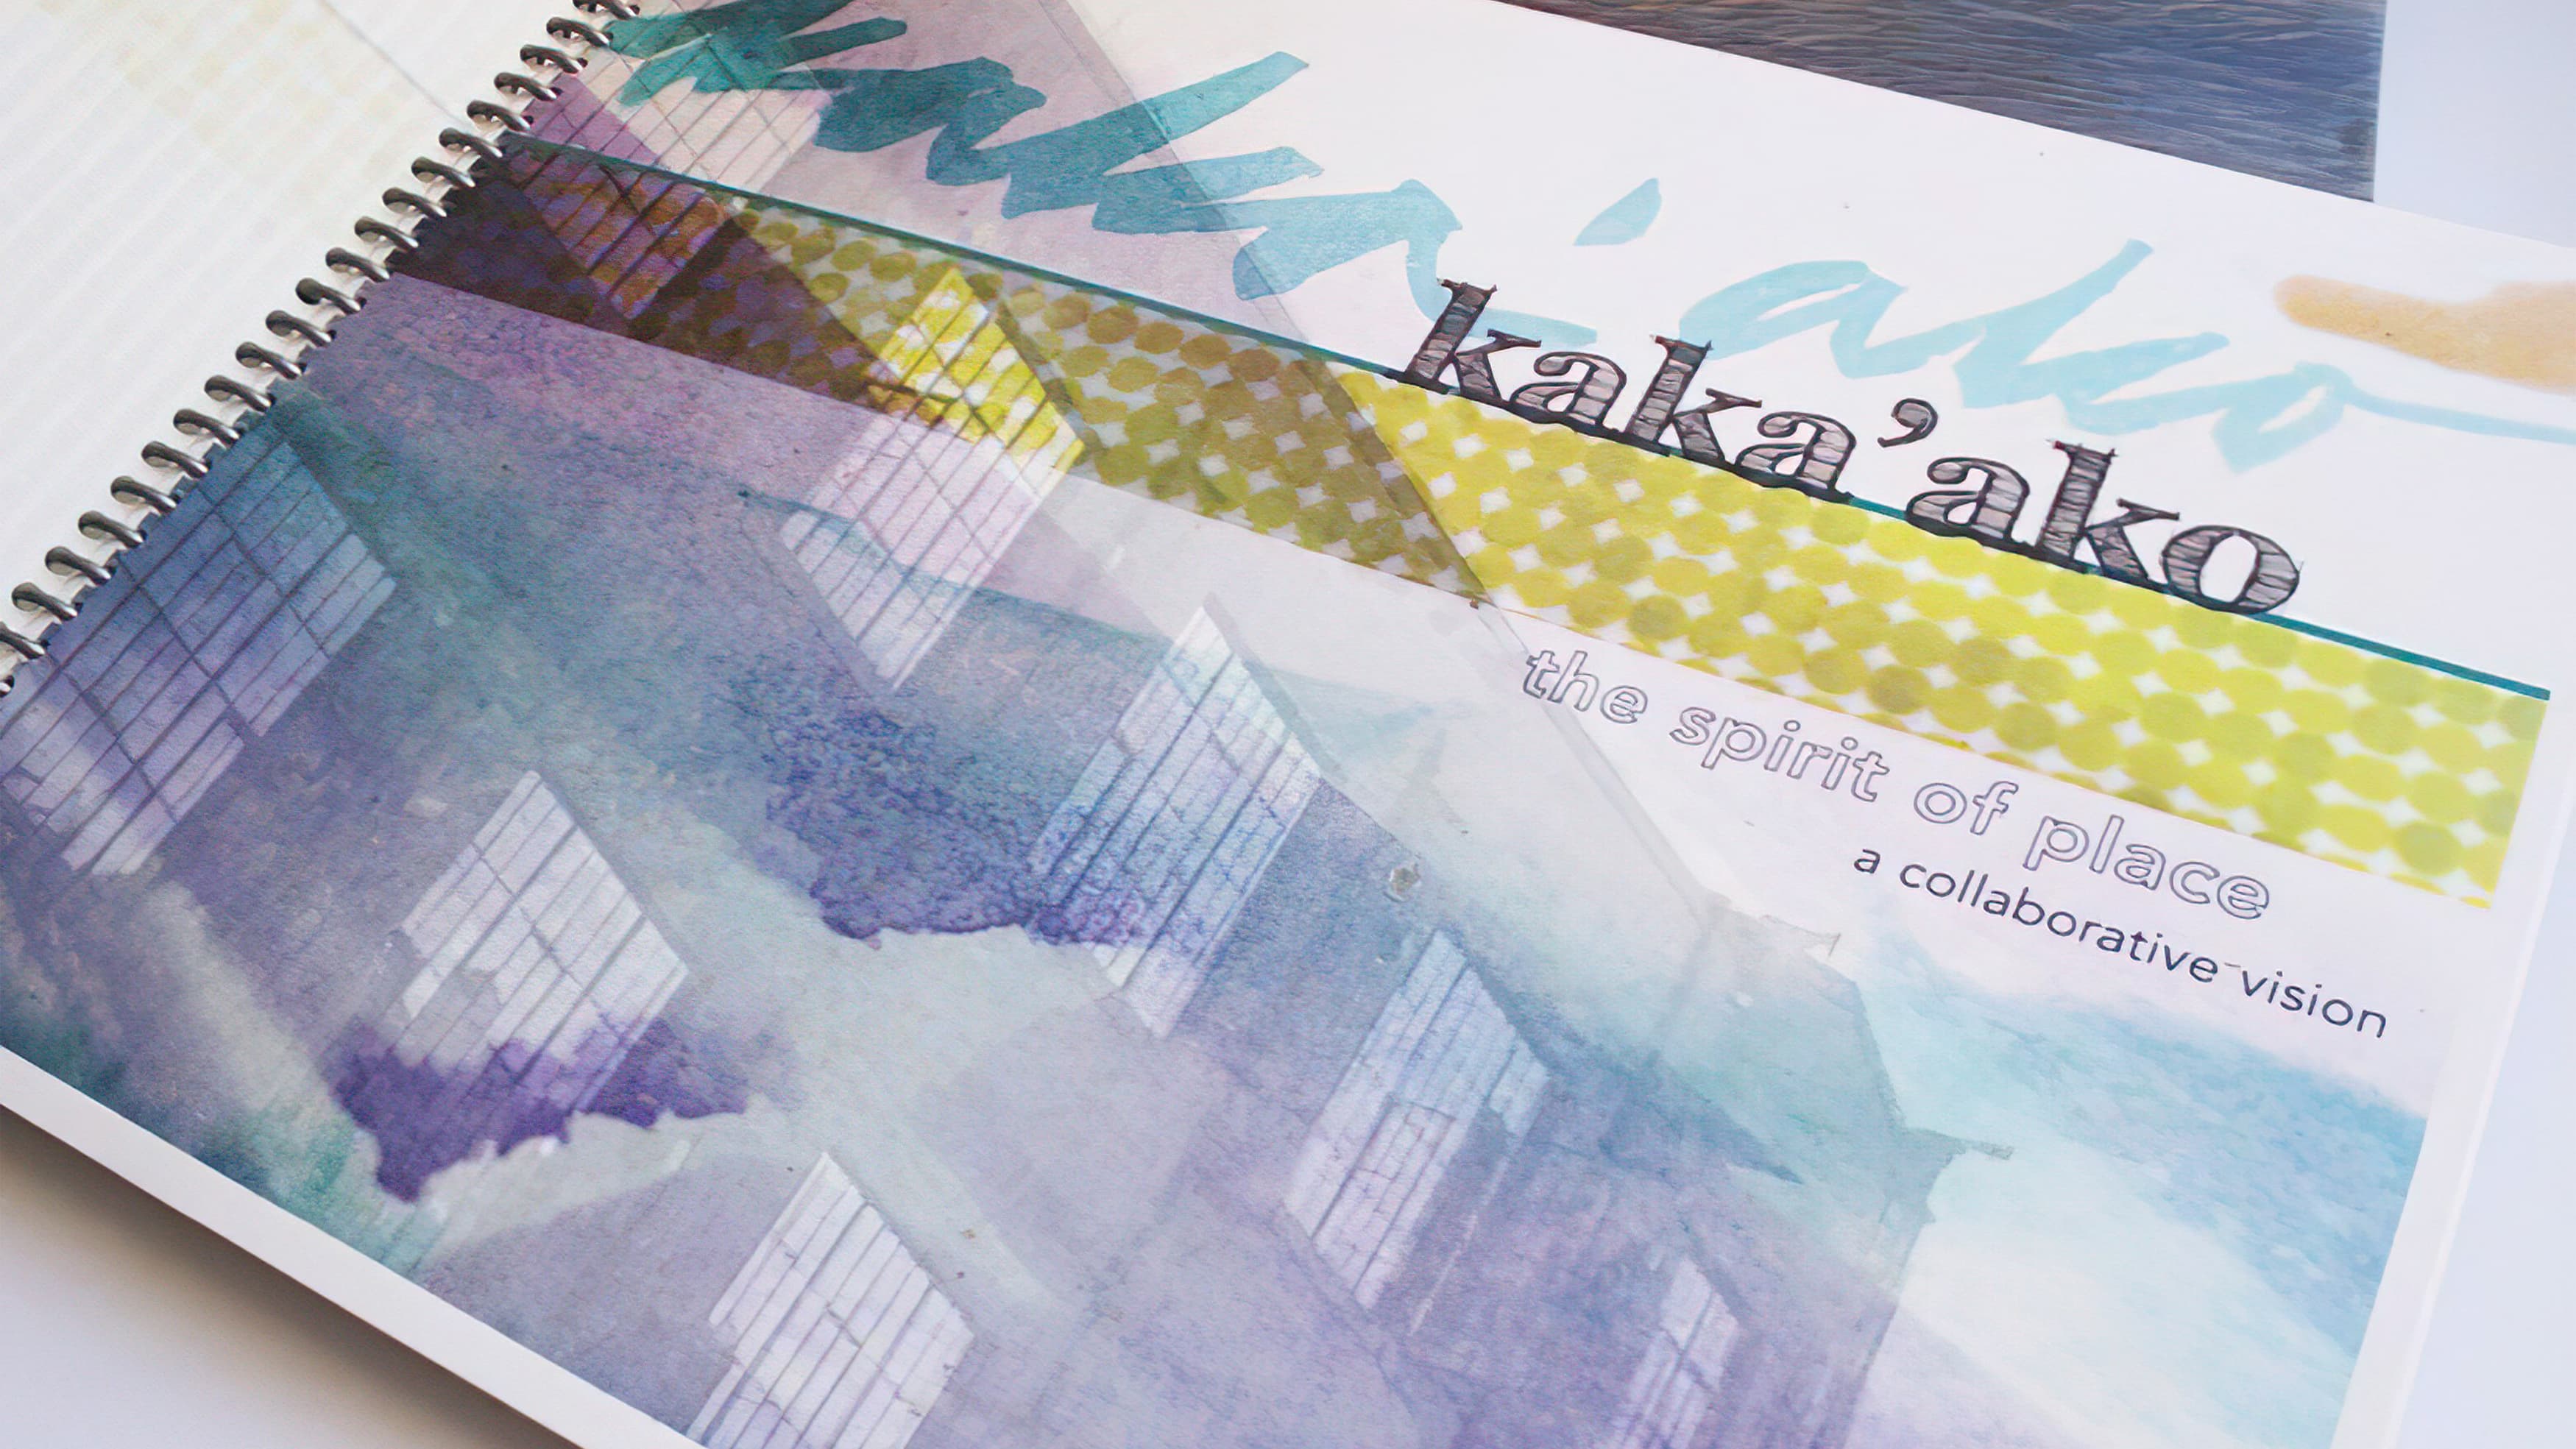 Kaka'ako brand positioning bookley with watercolor-style artwork